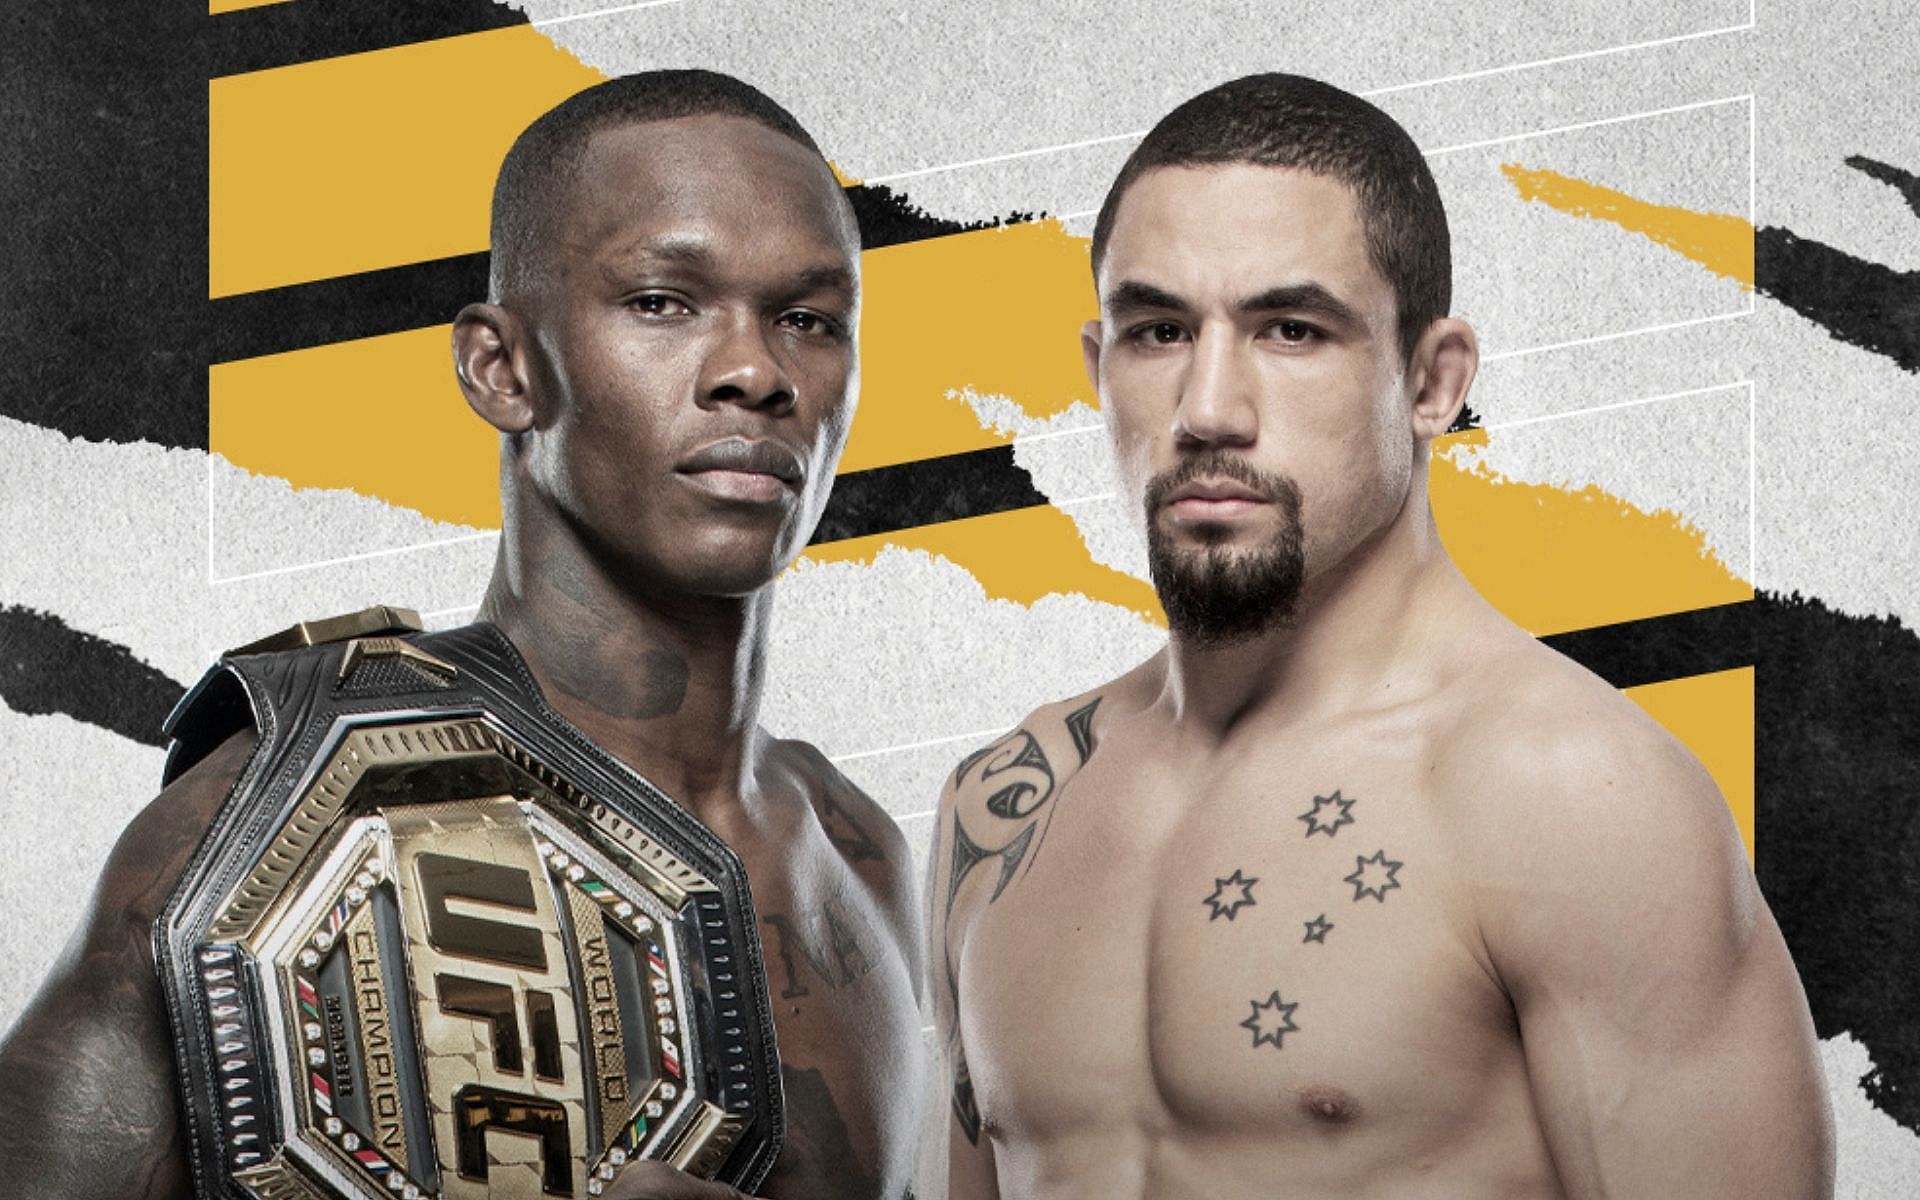 Israel Adesanya and Robert Whittaker collide in a much-anticipated rematch at UFC 271